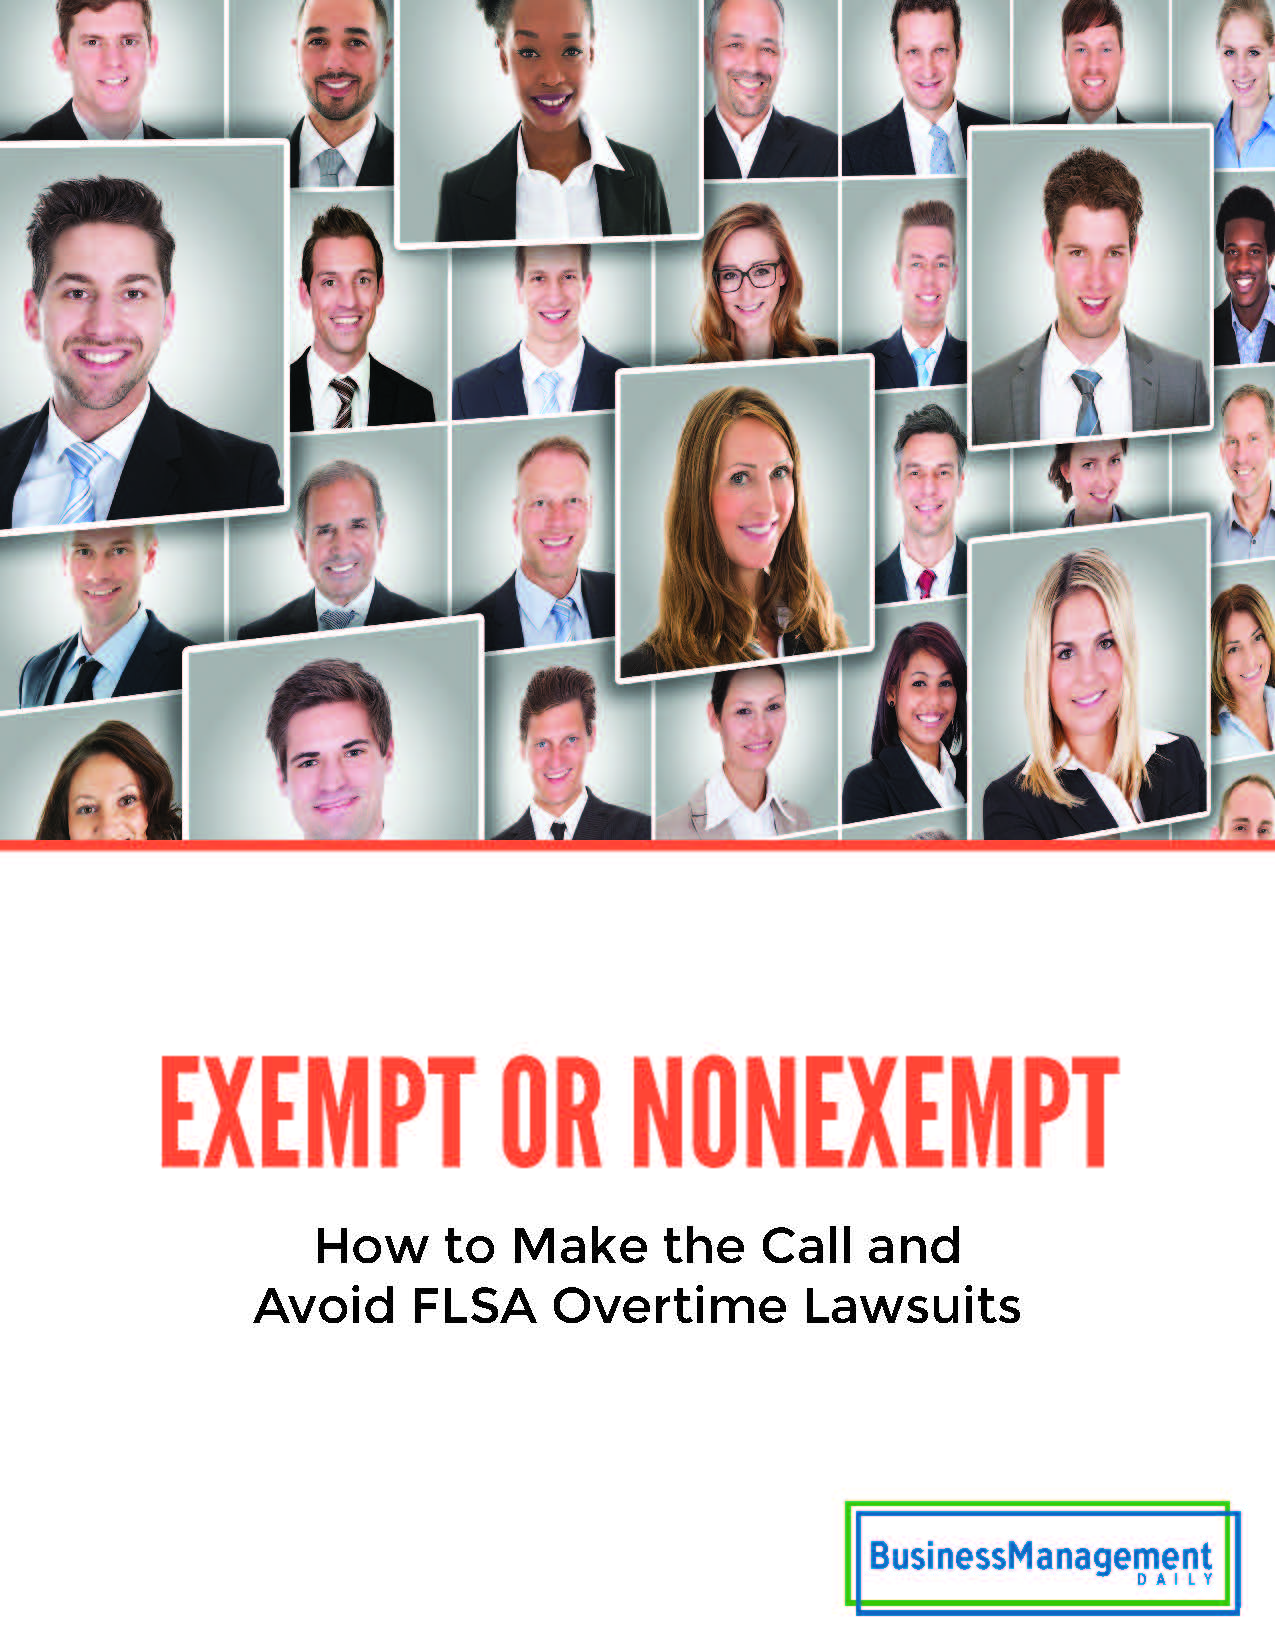 Exempt or Nonexempt? How to Make the Call and Avoid FLSA Overtime Lawsuits